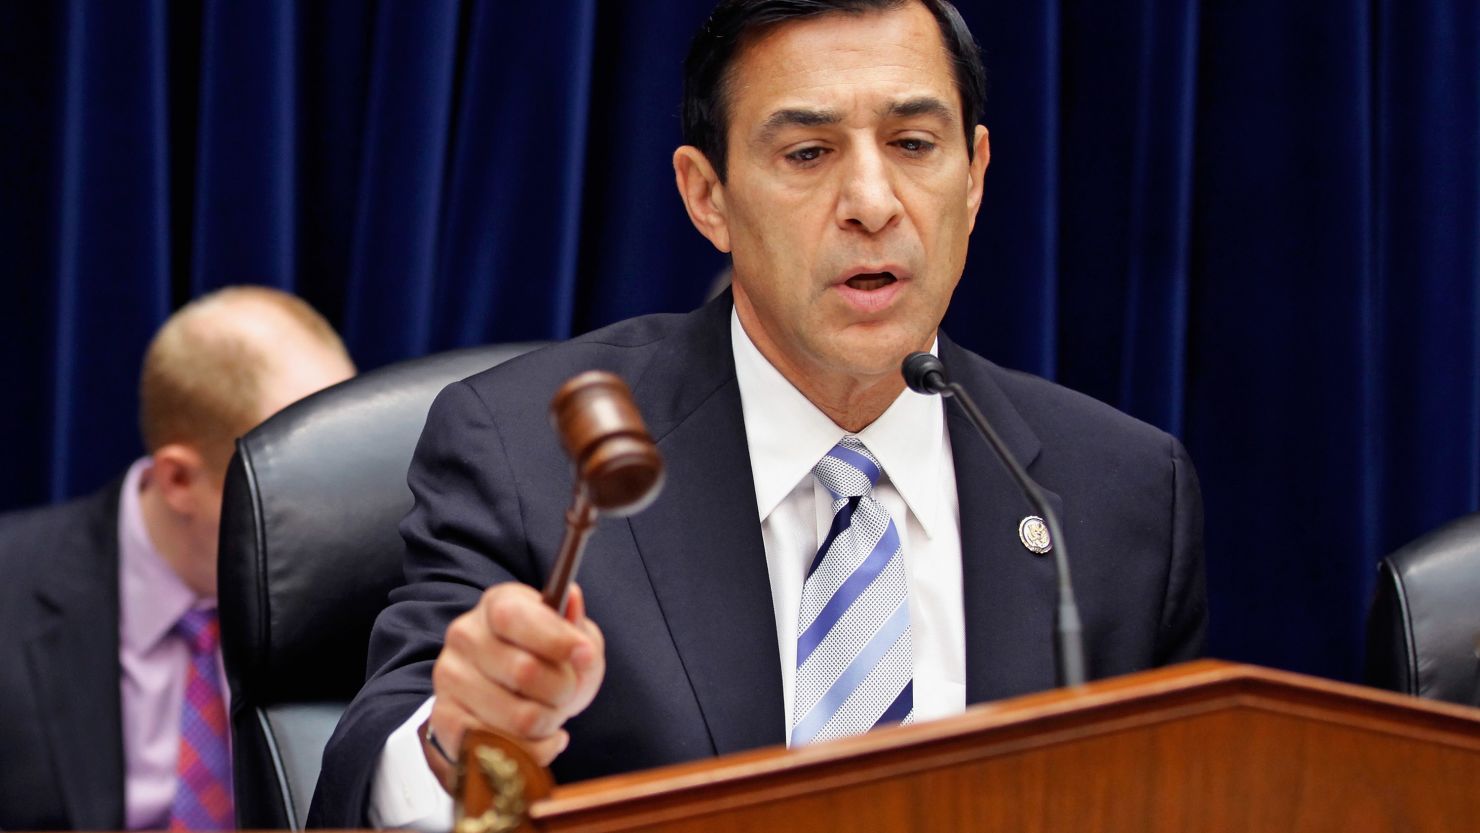 Rep. Darrell Issa, Chairman of the House Oversight Committee, holds a hearing in Washington on June 20, 2012.